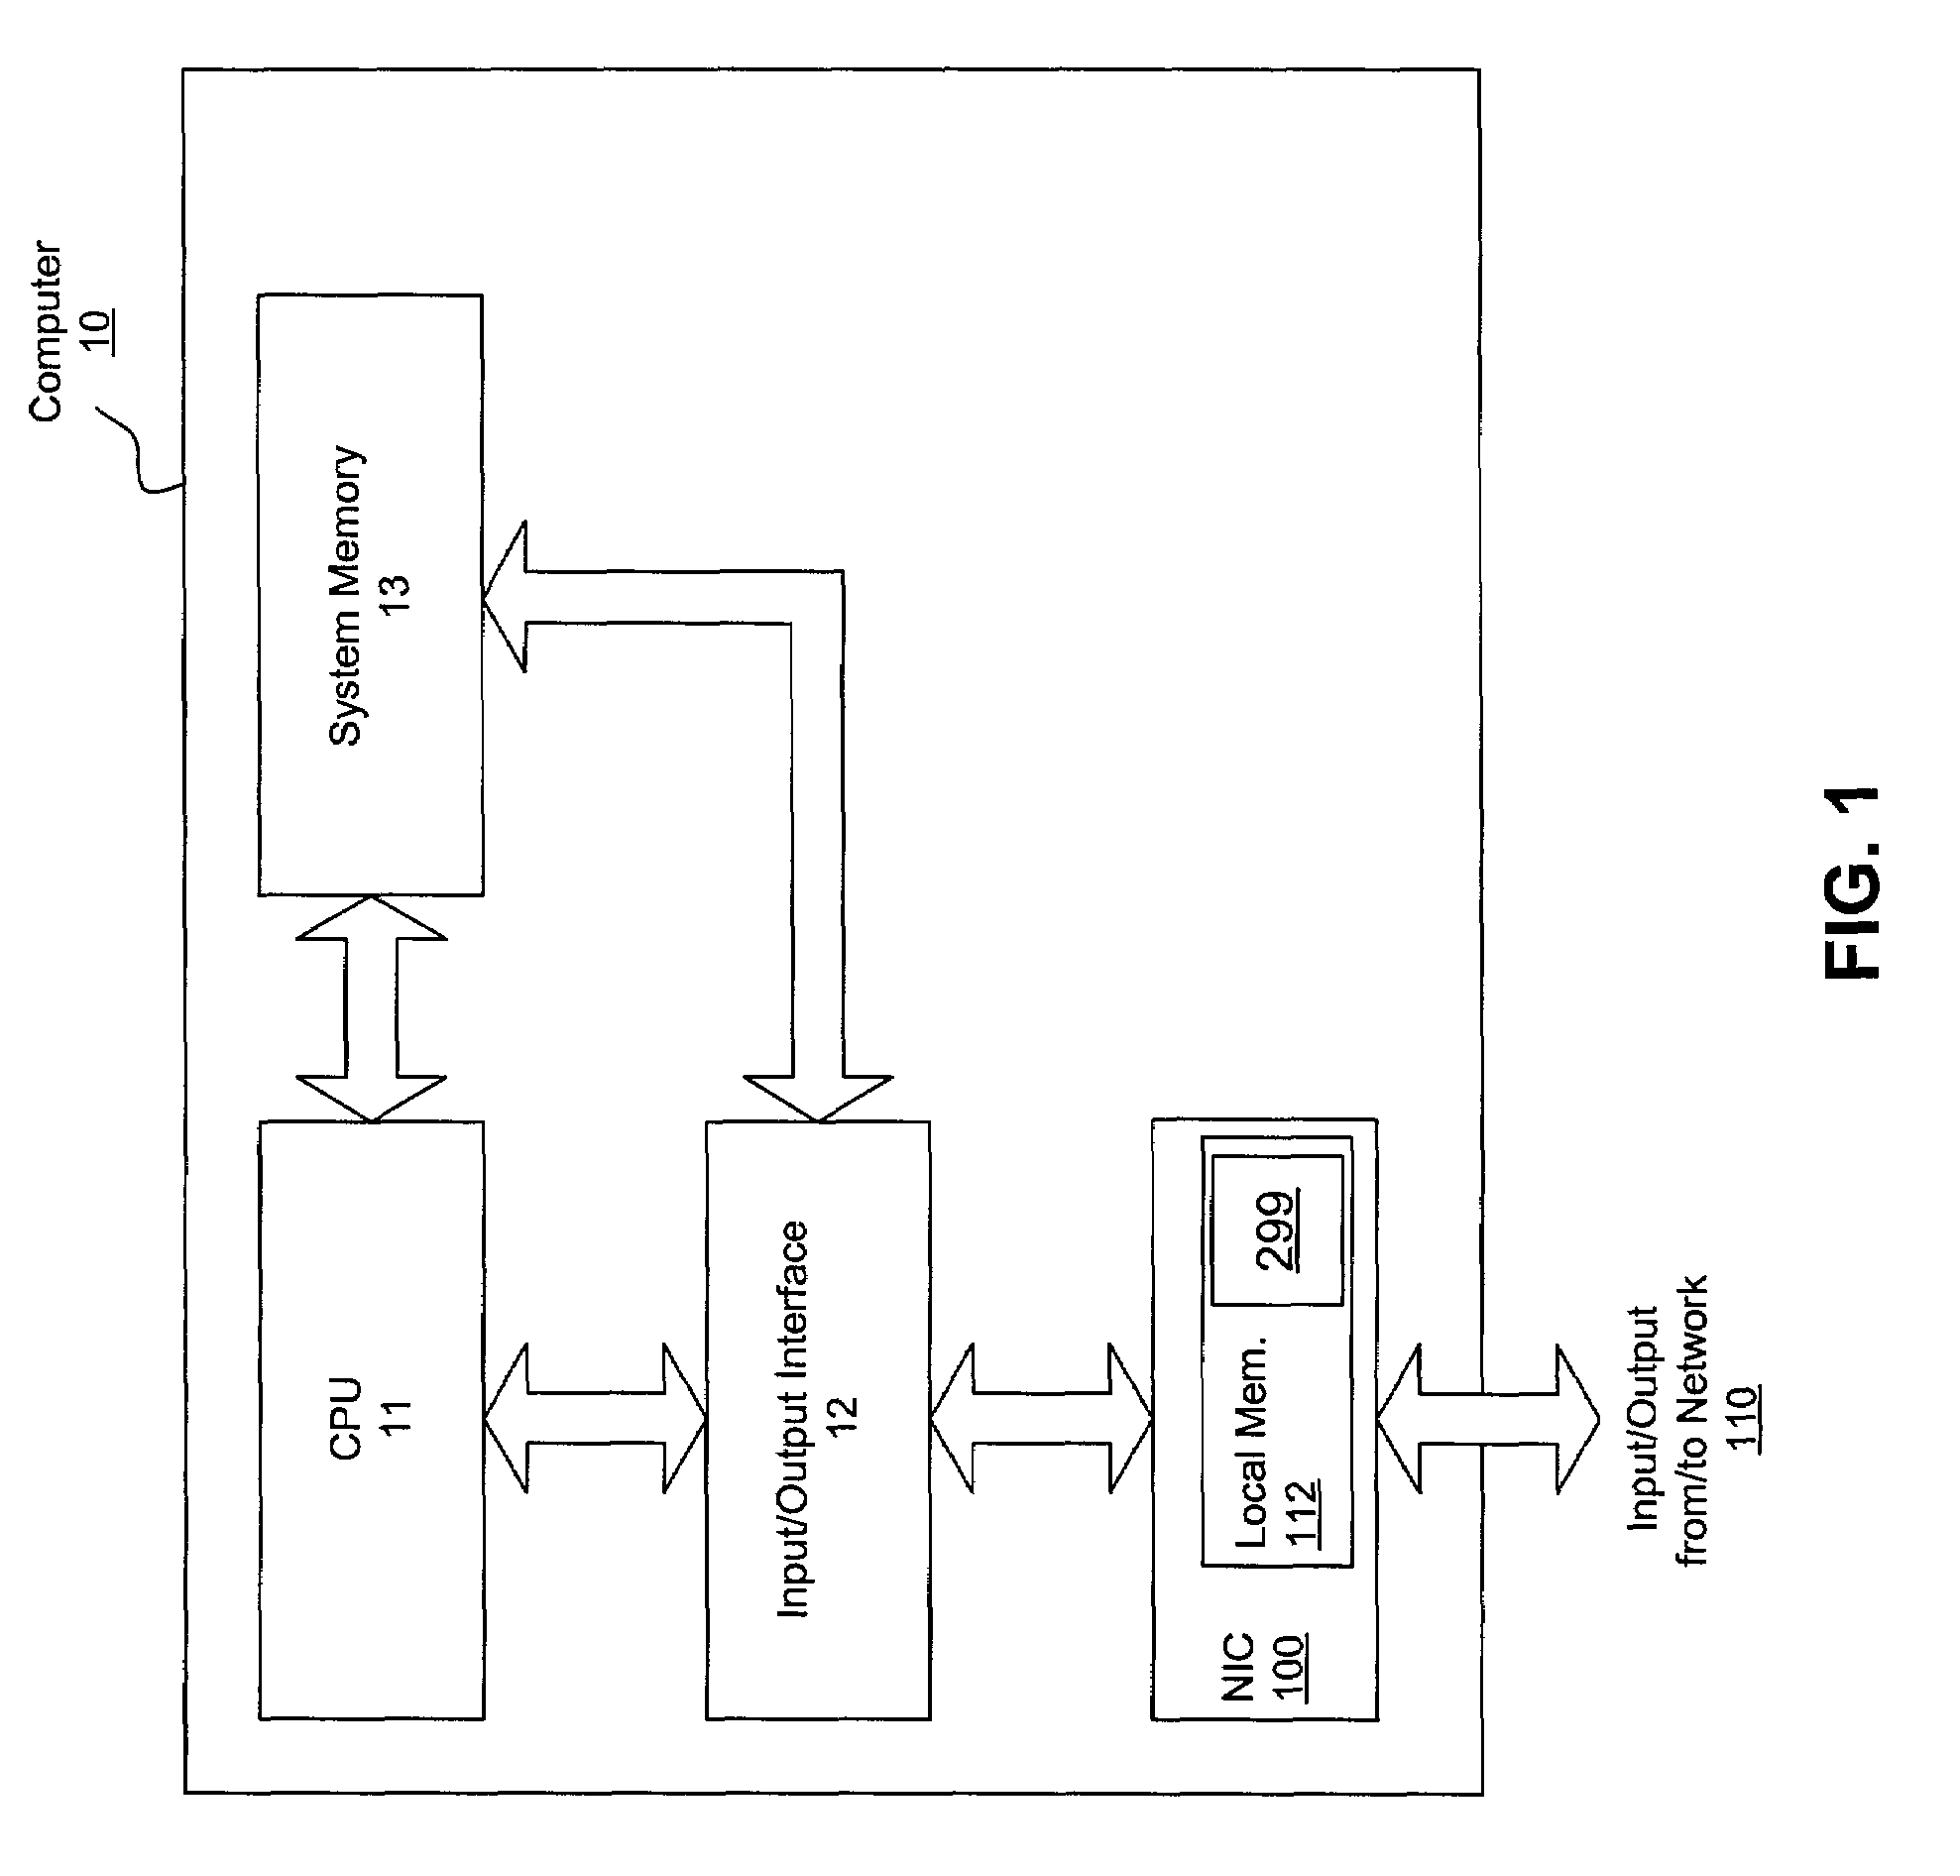 Method and apparatus for security protocol and address translation integration